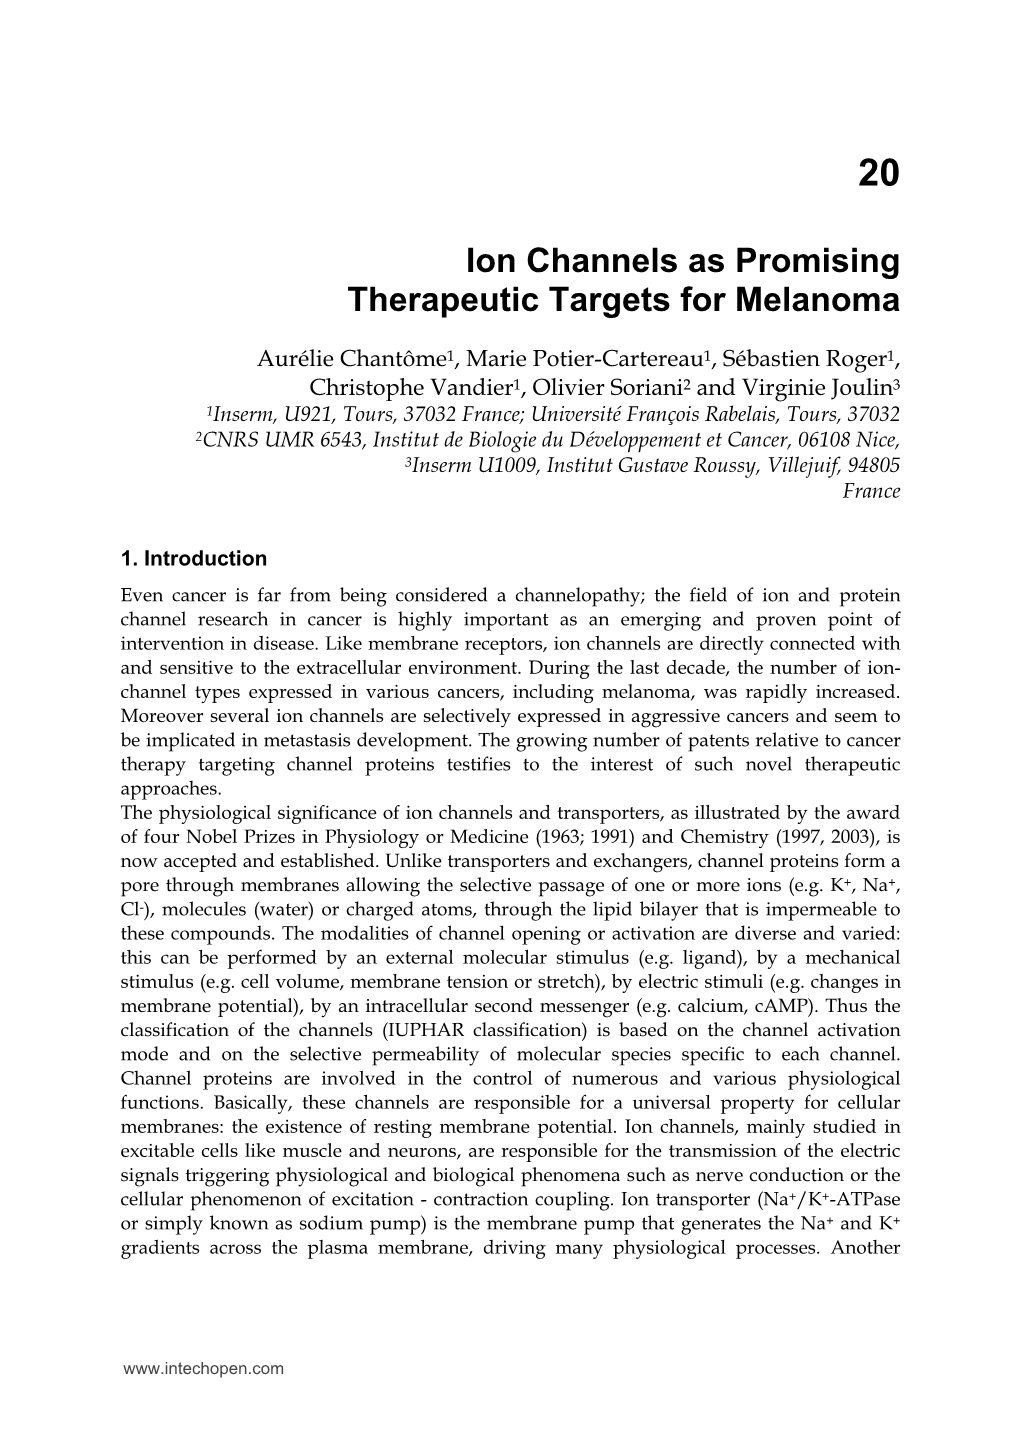 Ion Channels As Promising Therapeutic Targets for Melanoma